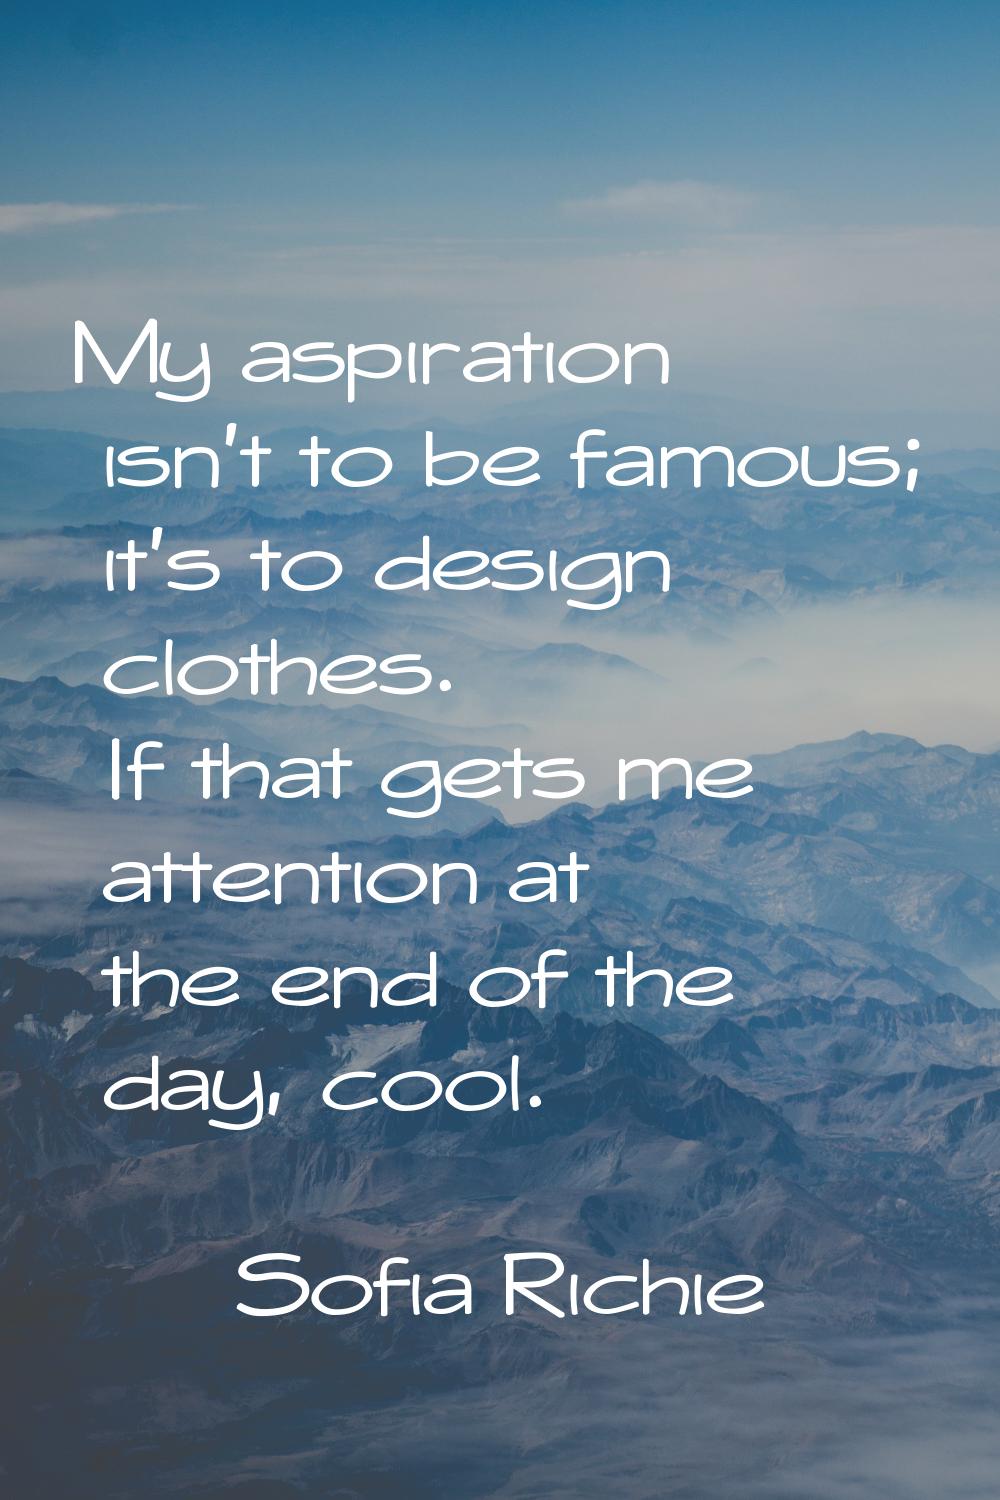 My aspiration isn't to be famous; it's to design clothes. If that gets me attention at the end of t